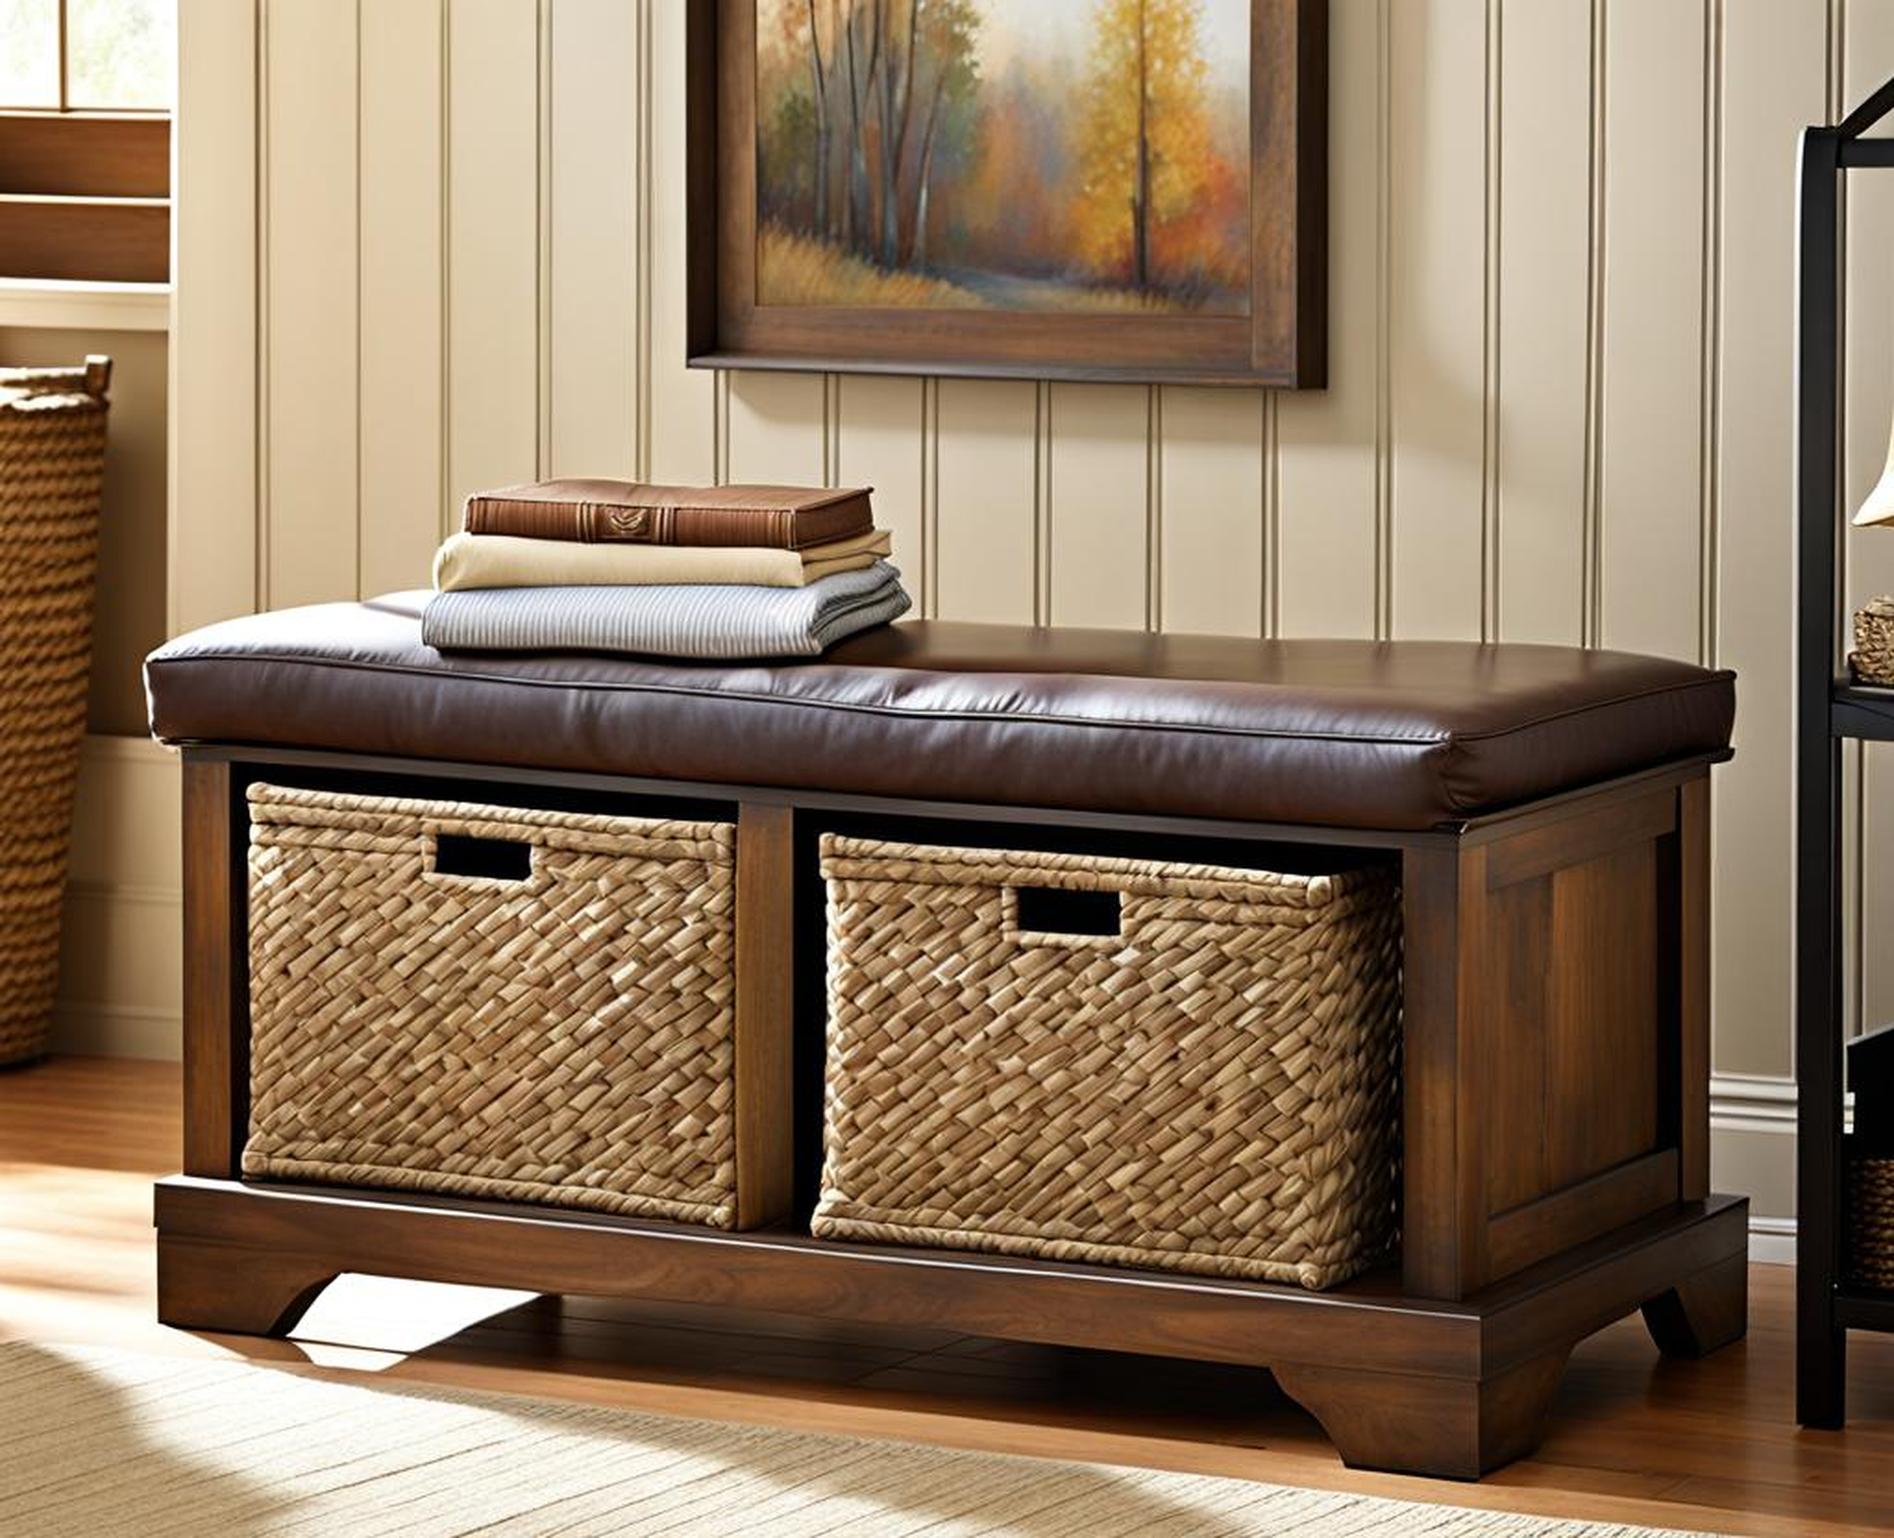 rustic bedroom bench with storage